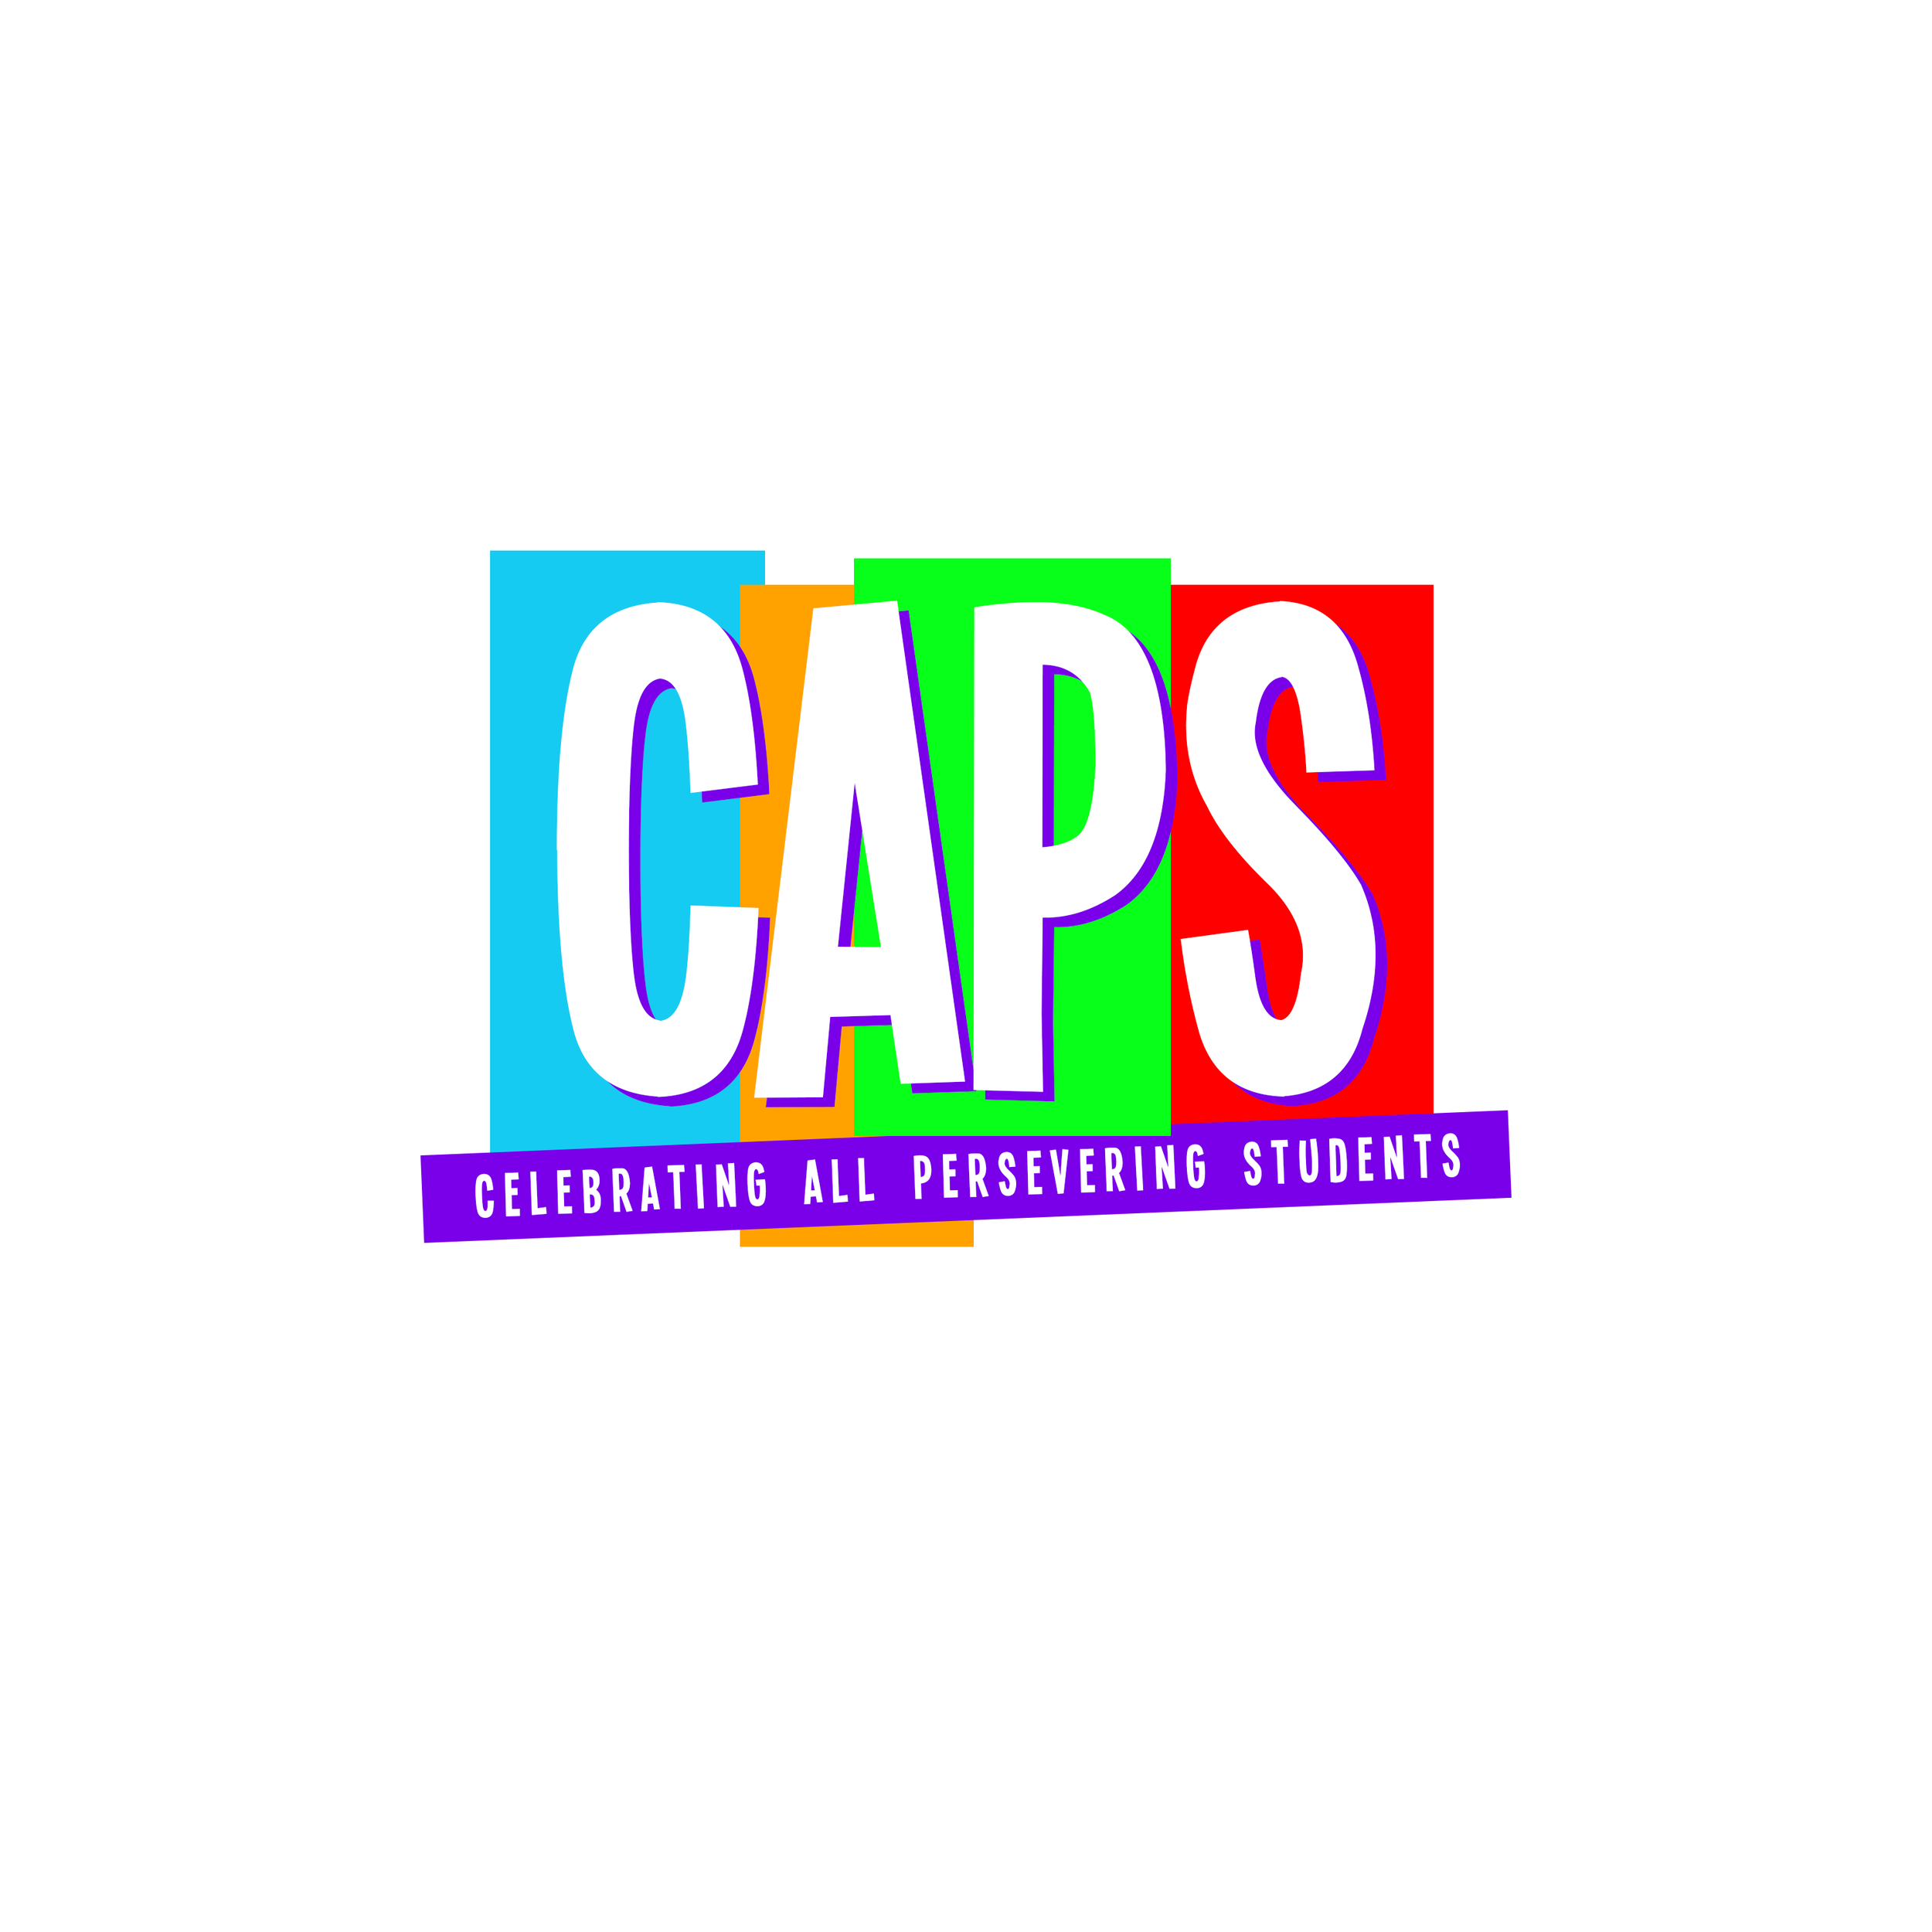 C.A.P.S. - Celebrating All Persevering Students